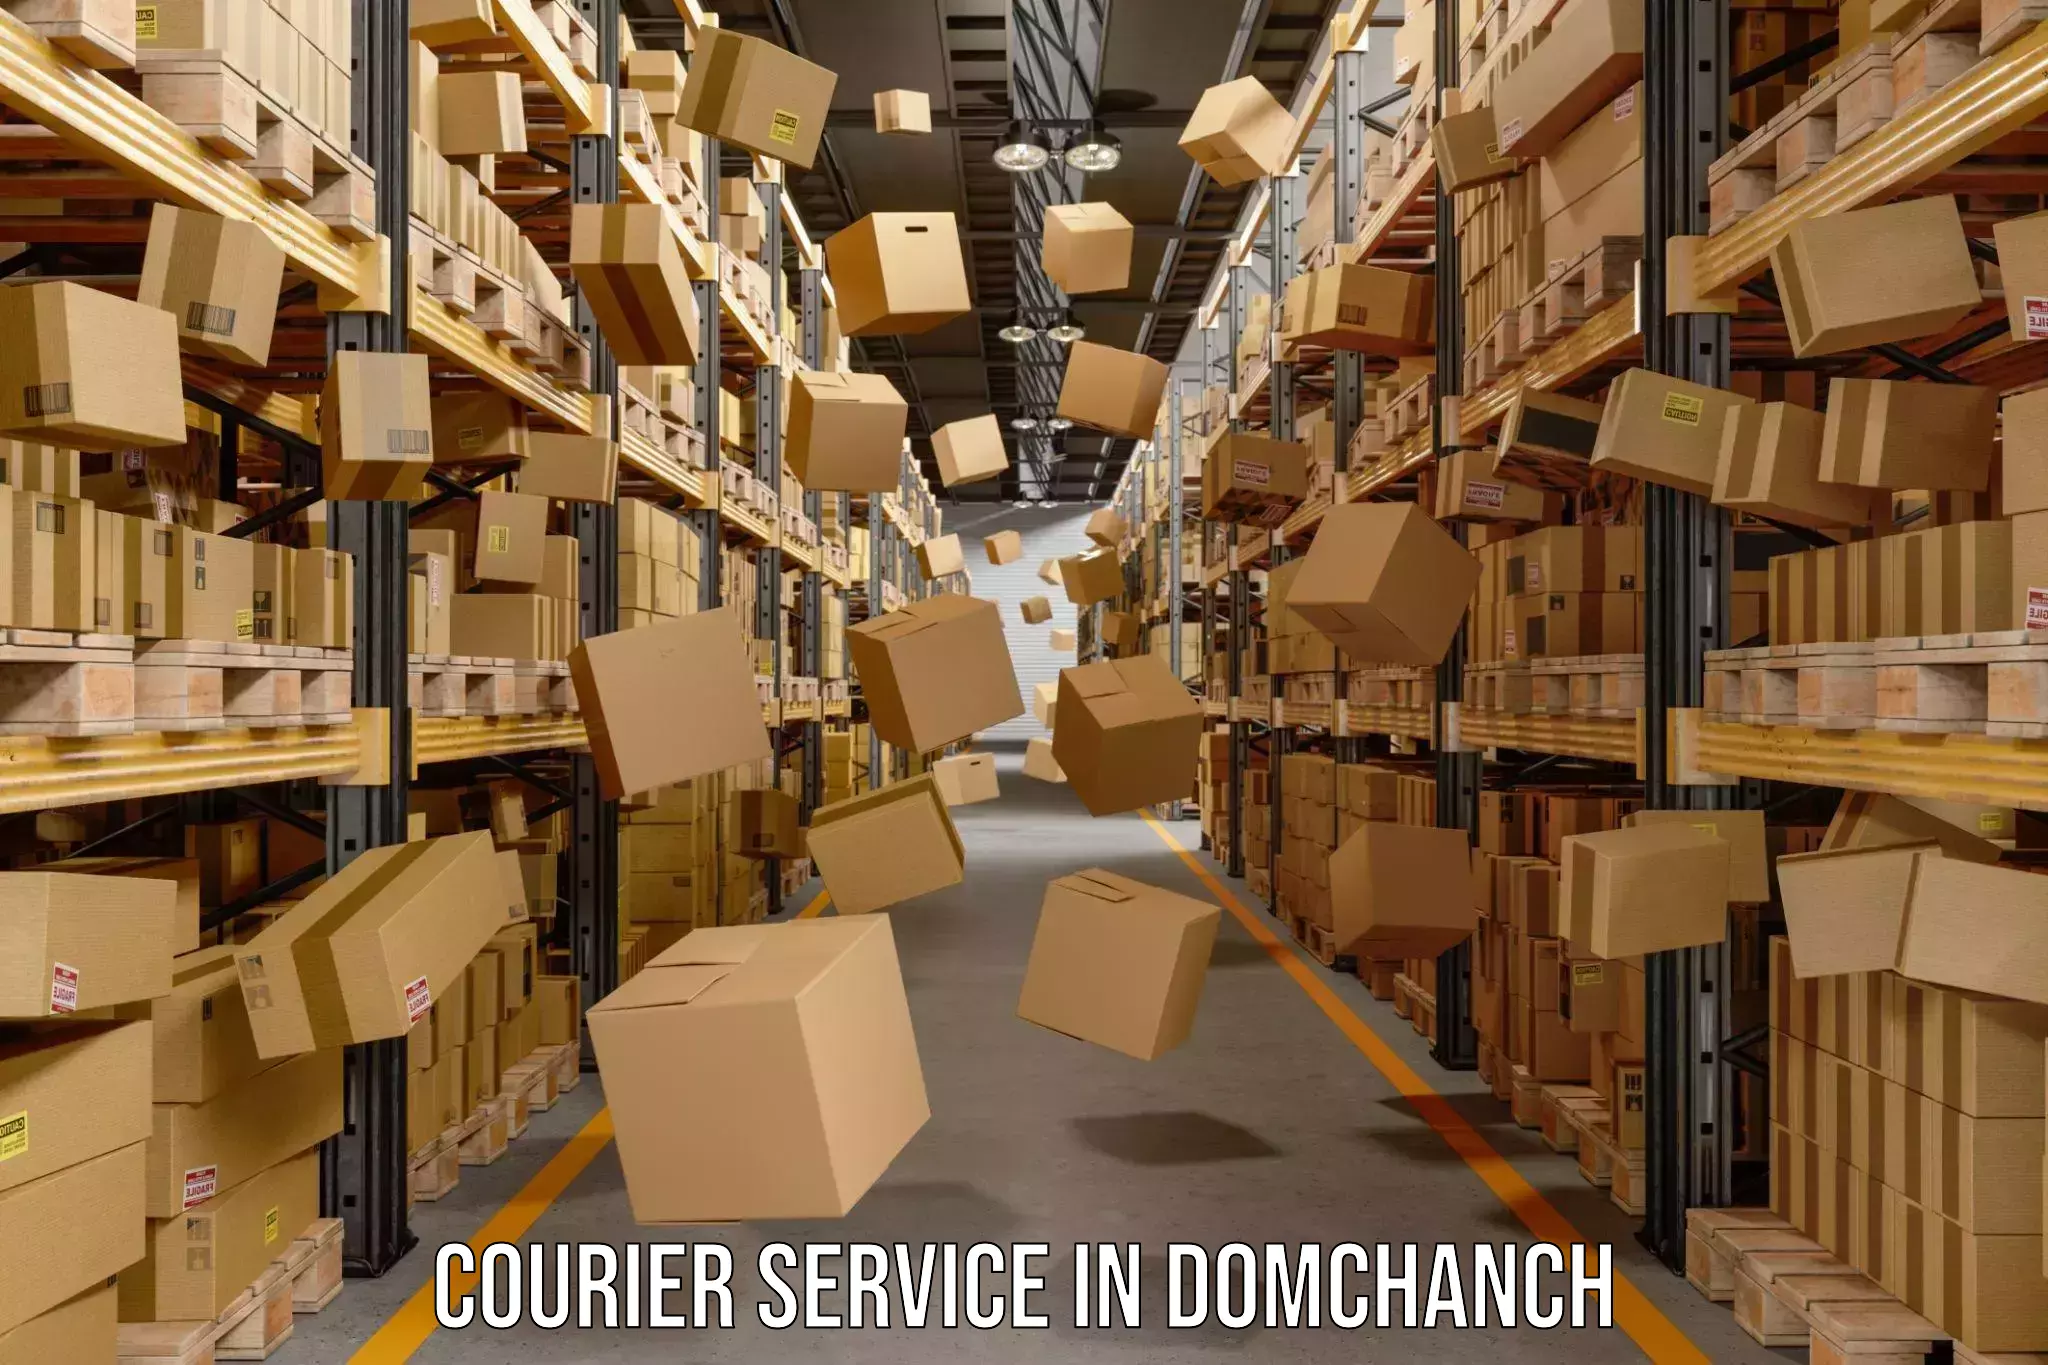 Sustainable shipping practices in Domchanch